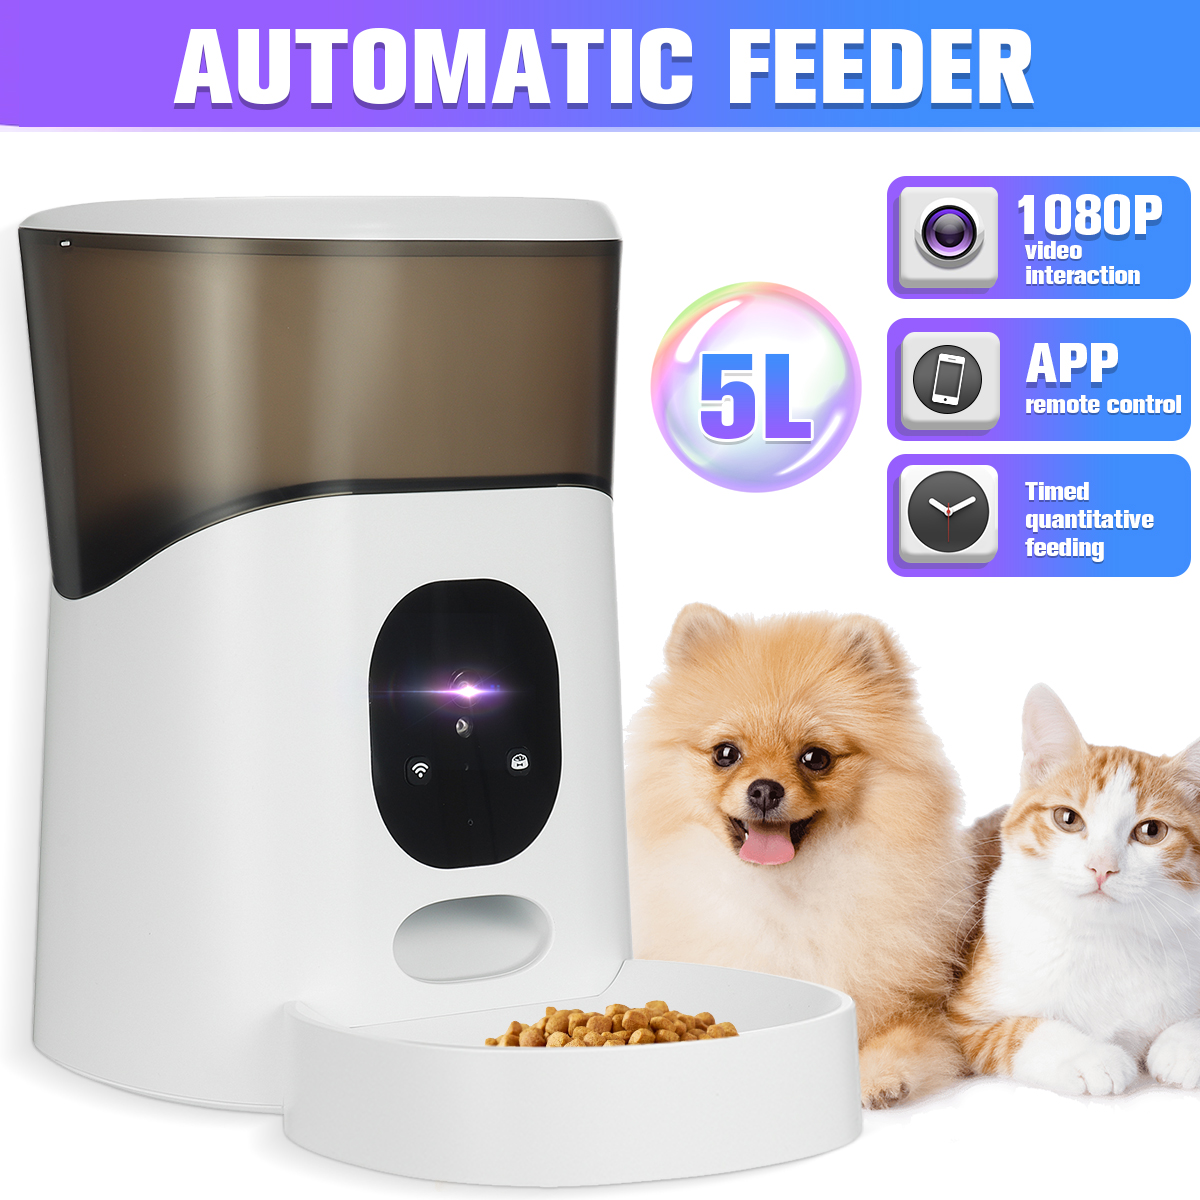 5L-Automatic-Pet-Feeder-Timing-Recording-Voice-APP-control-Intelligent-Dog-Feeding-Cat-Bowls-Puppy-S-1957123-2